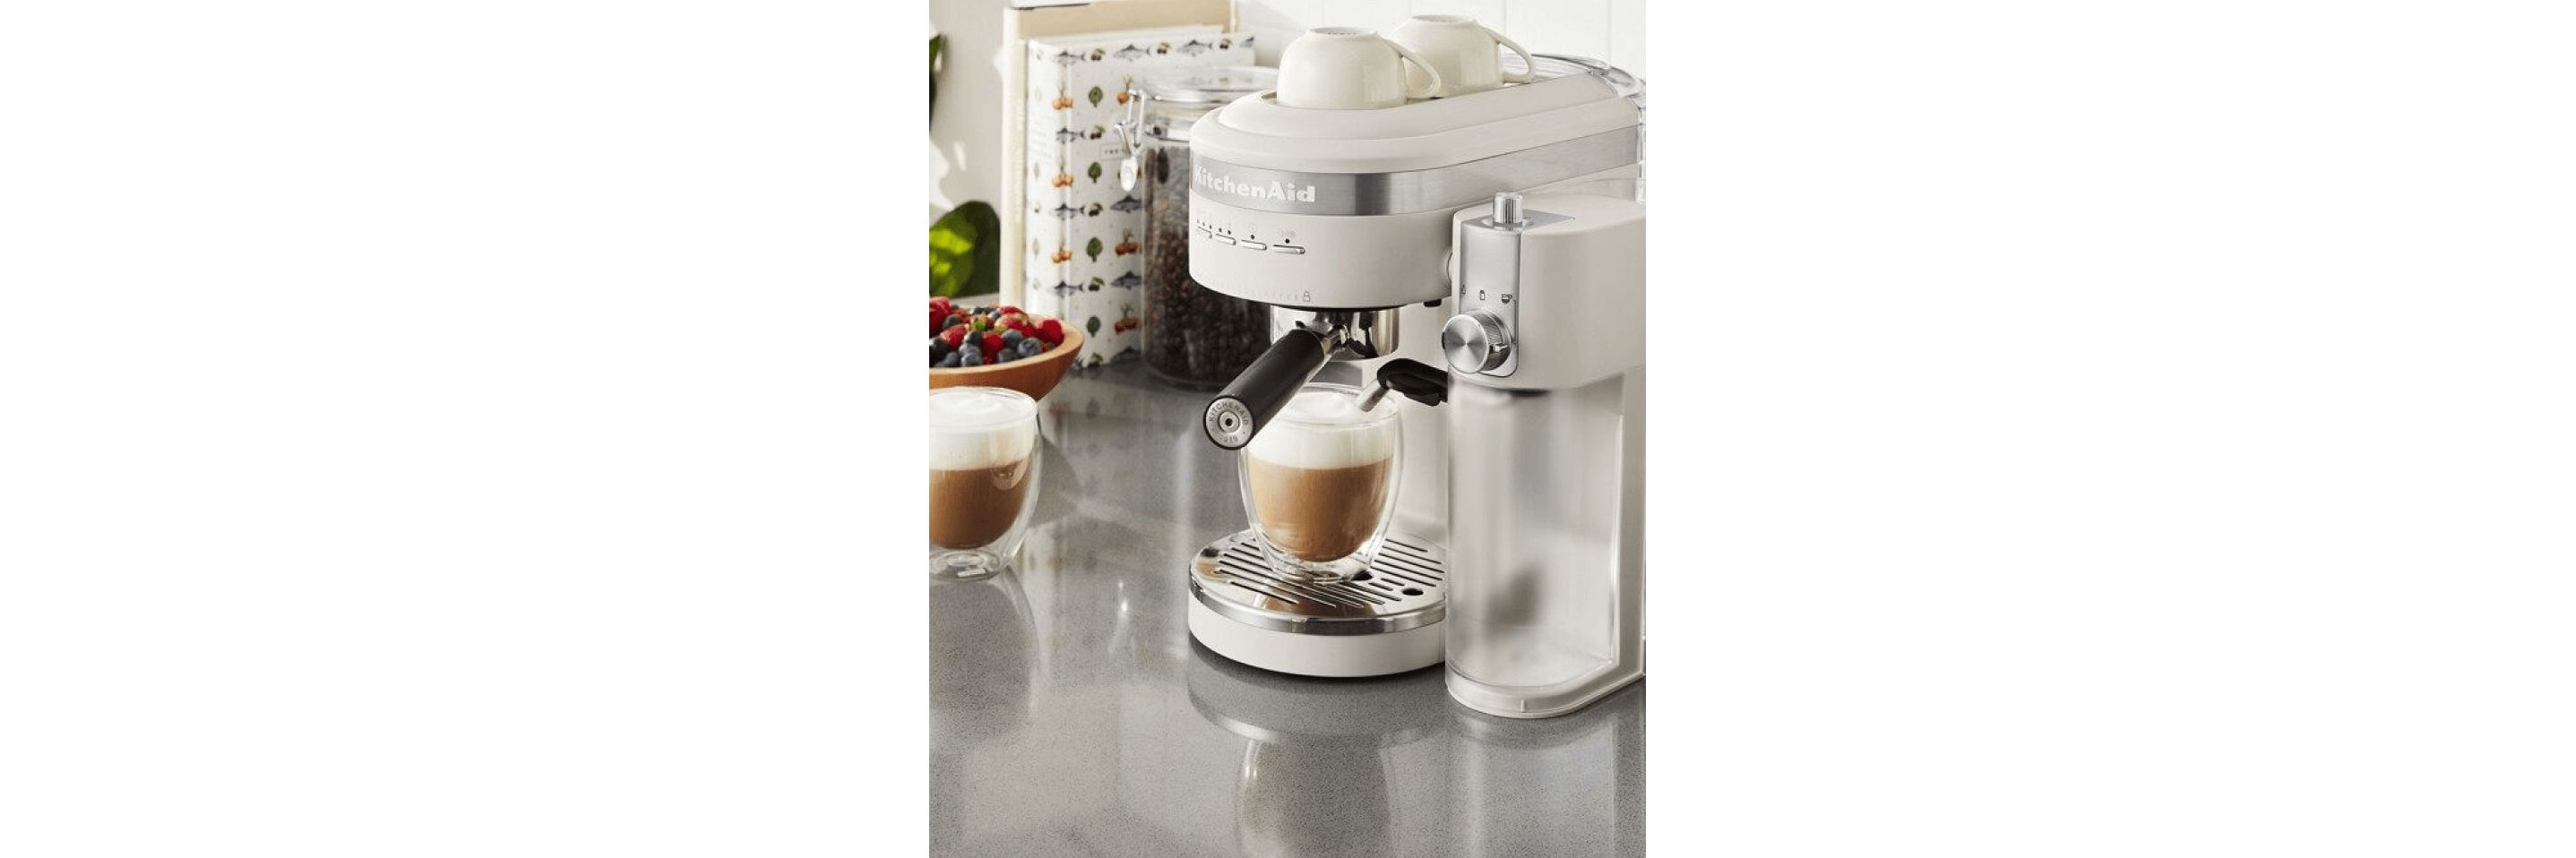 | to Culinary Life KitchenAid to Inspiration Appliances Bring Kitchen